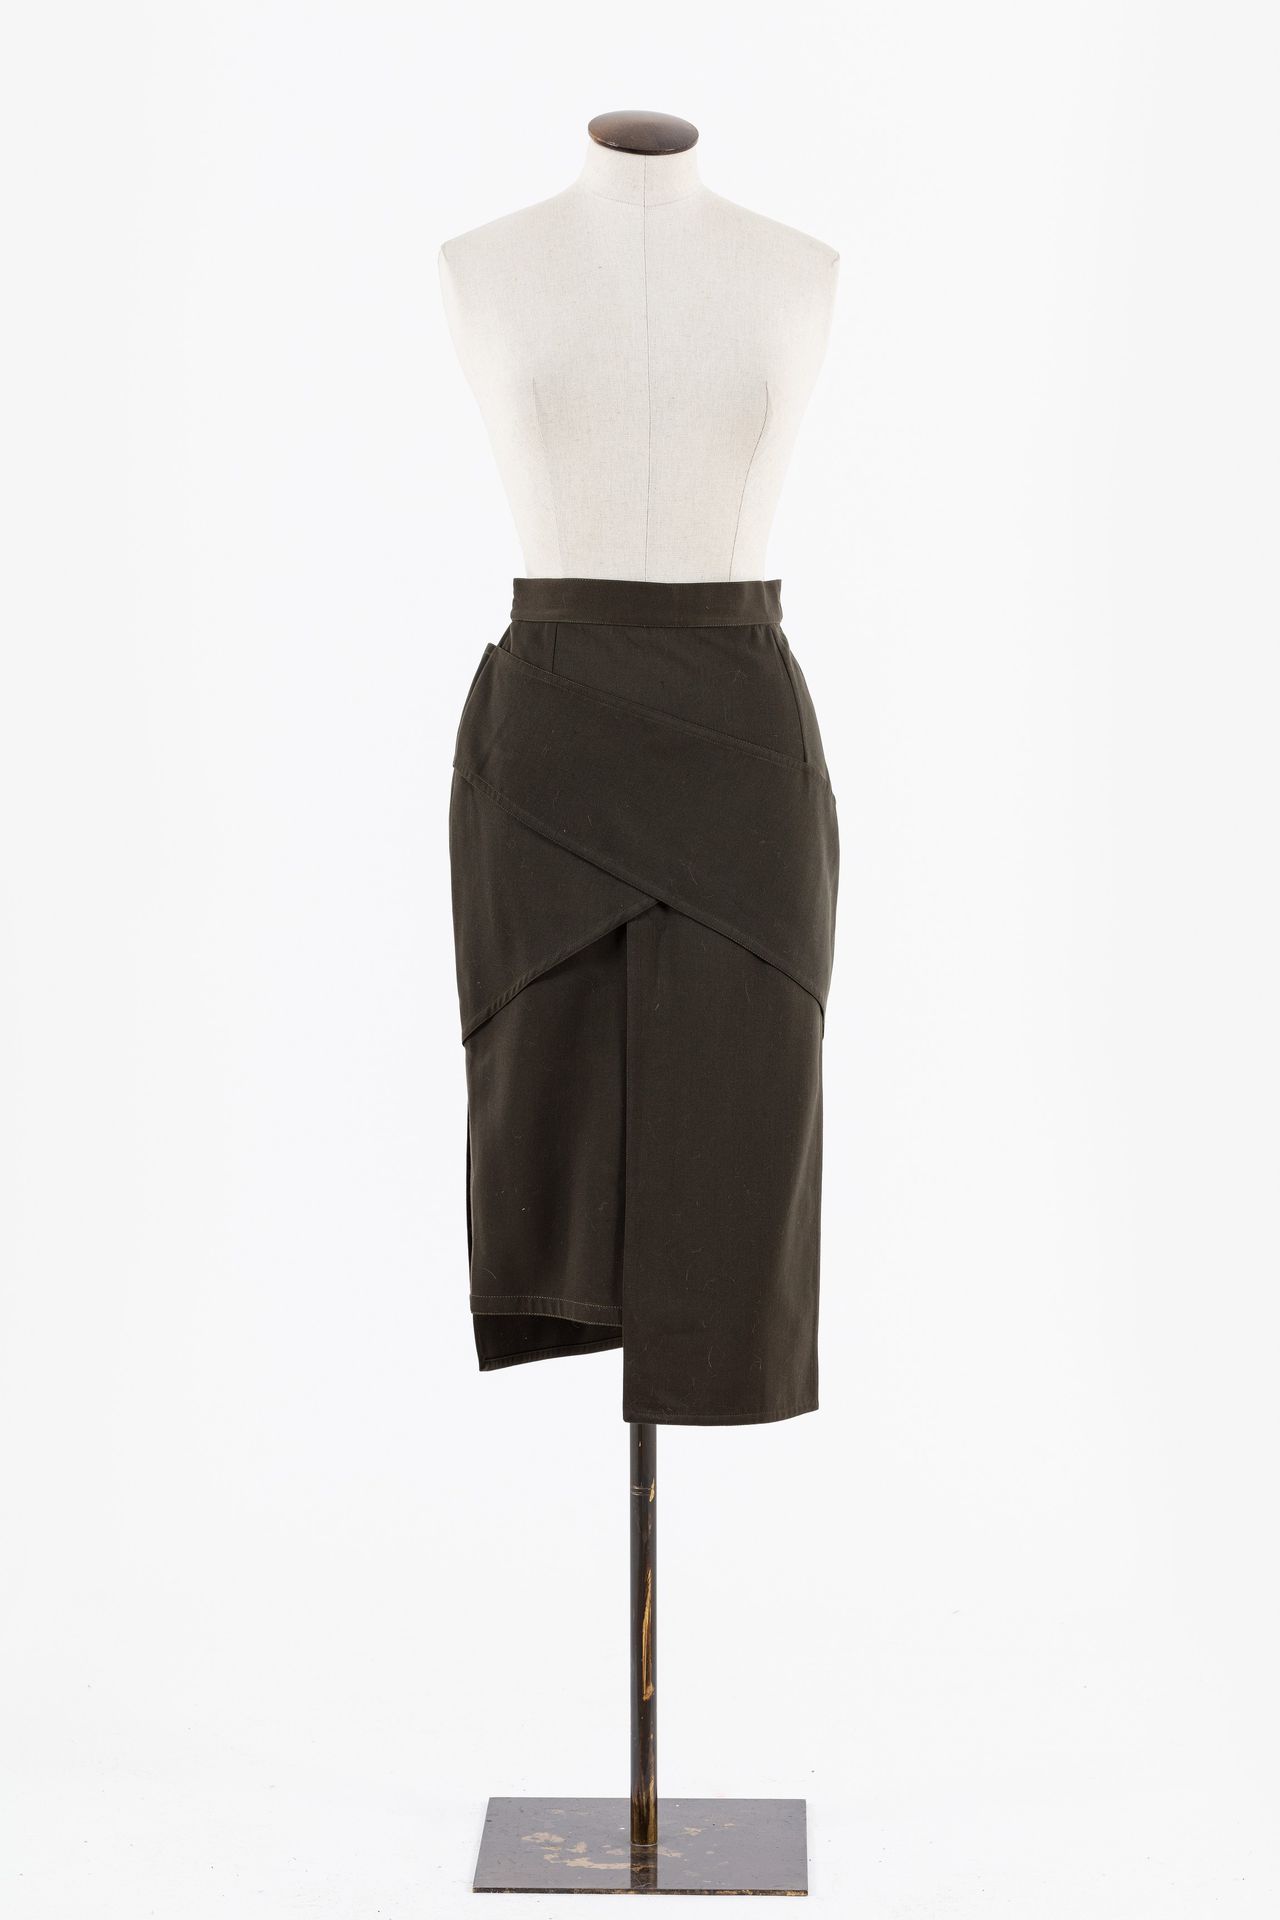 GIANNI VERSACE made in Italy: long skirt in khaki cotton… | Drouot.com